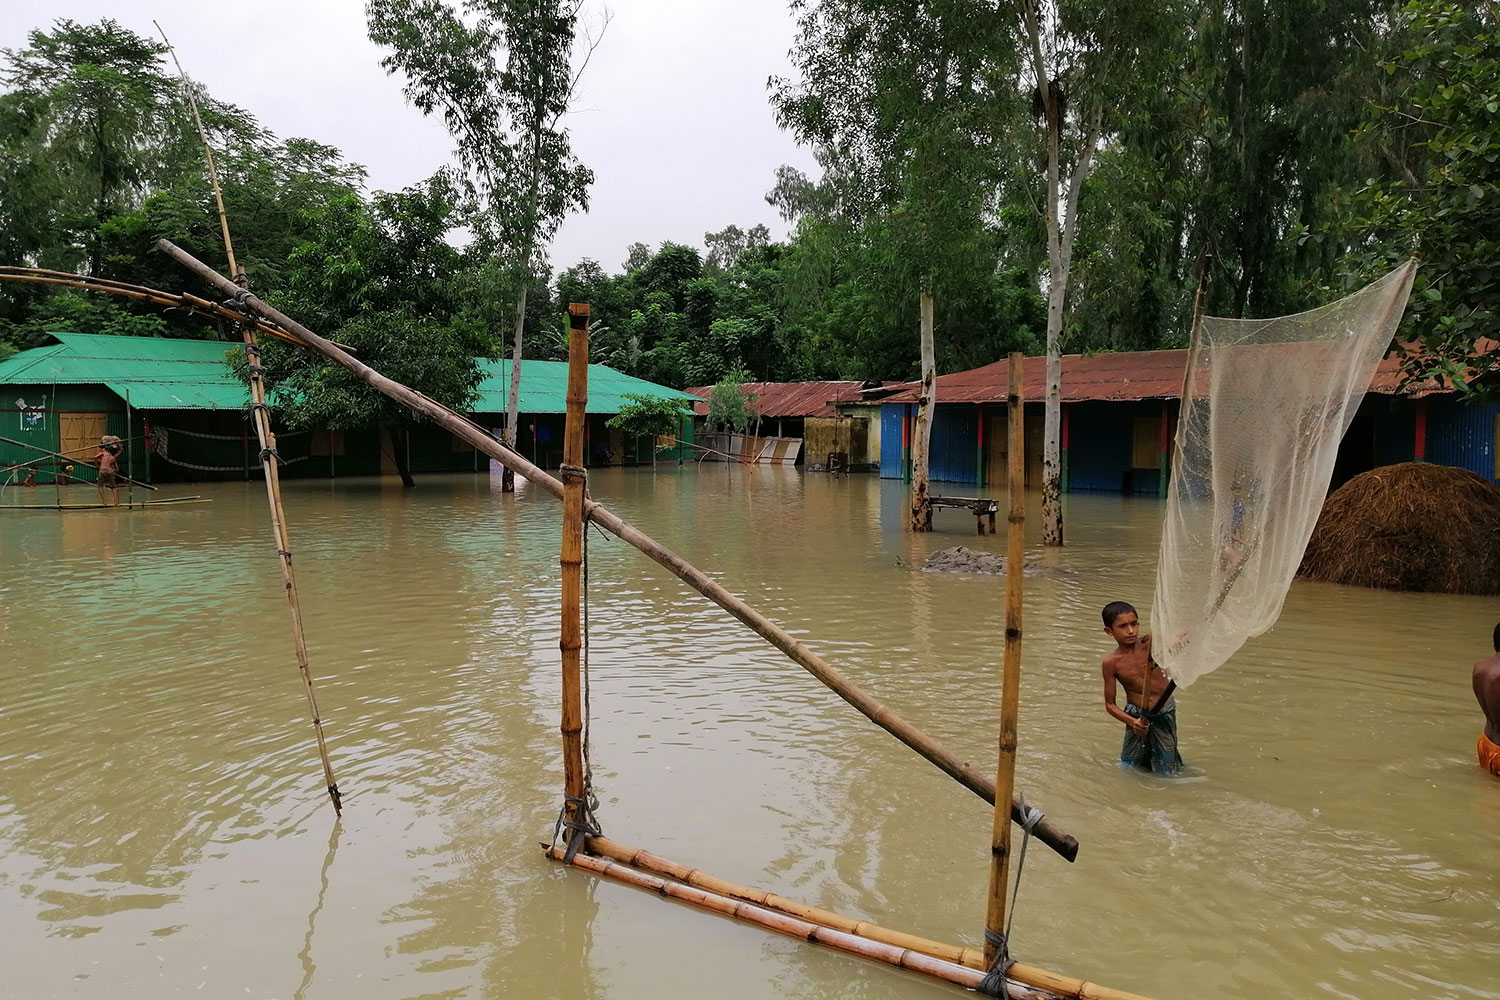 A flooded village demonstrates how climate change has caused unpredictable weather patterns around the world, including in flood-prone Bangladesh. 